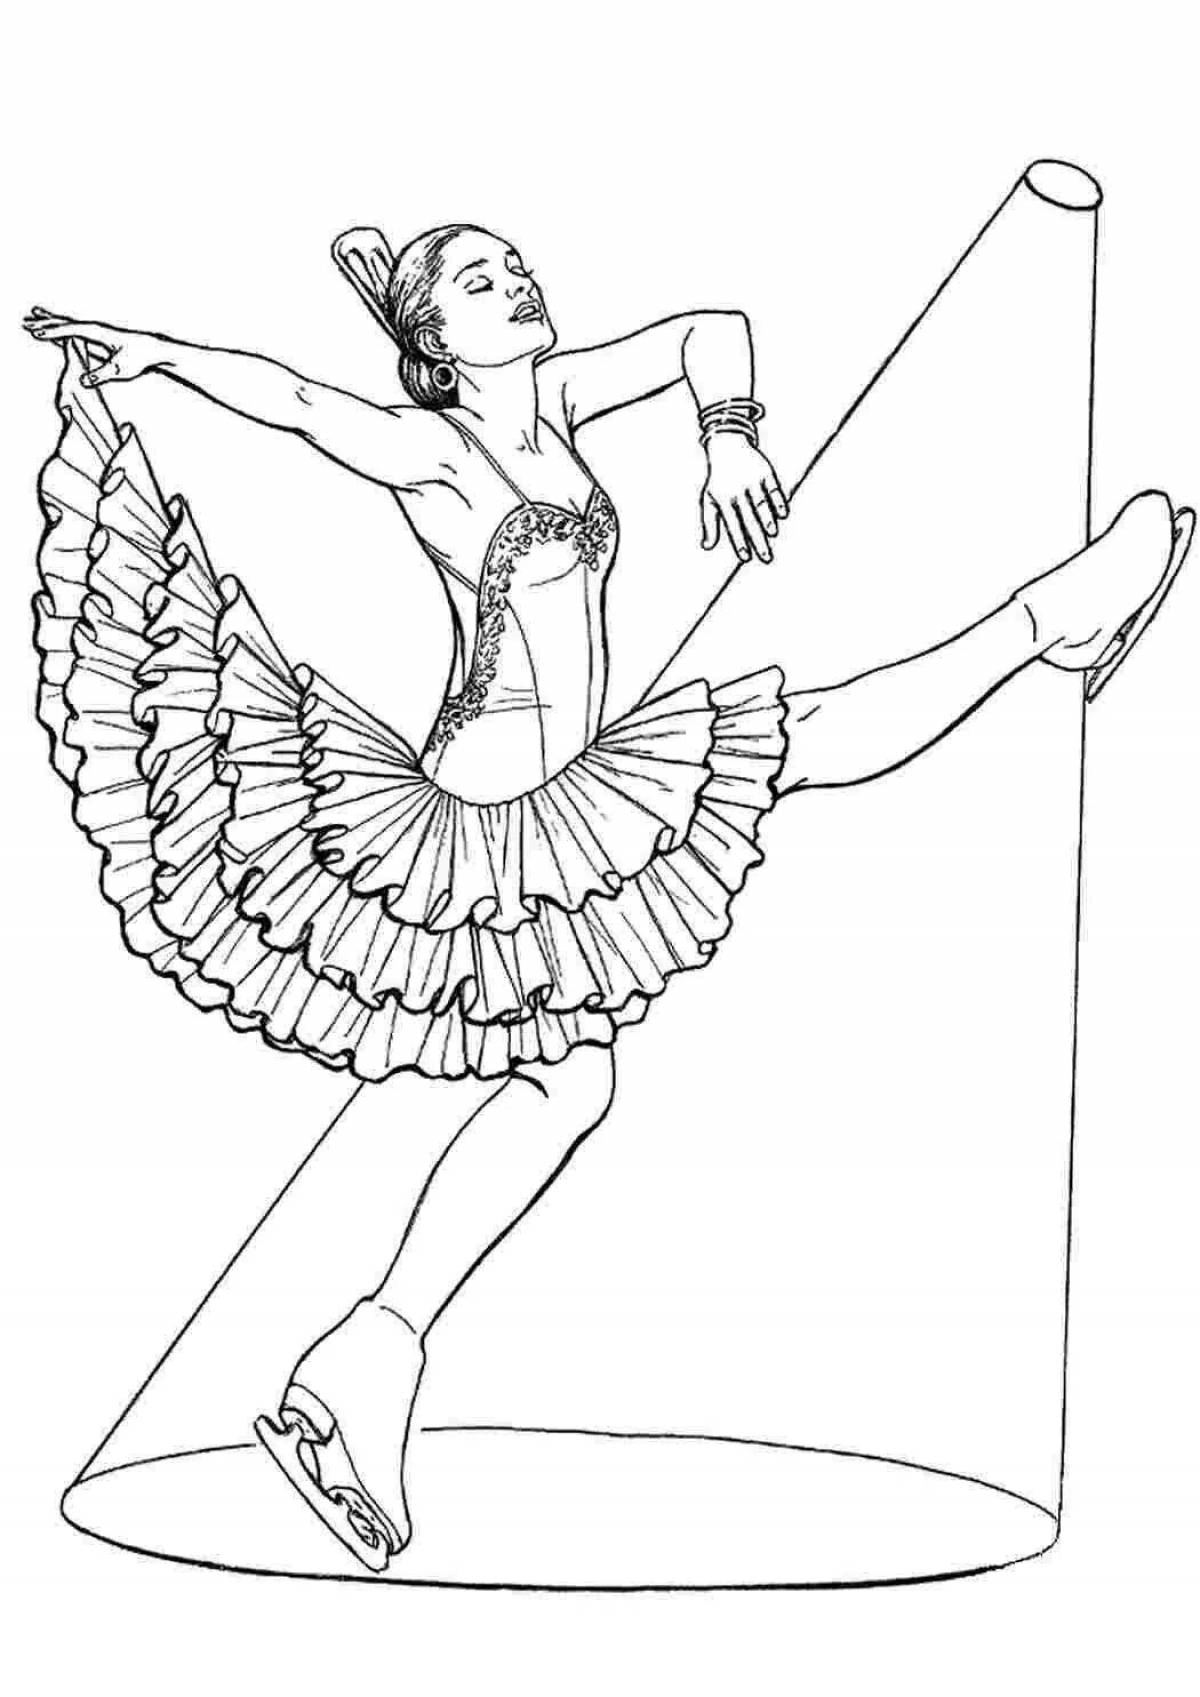 Amazing figure skater coloring book